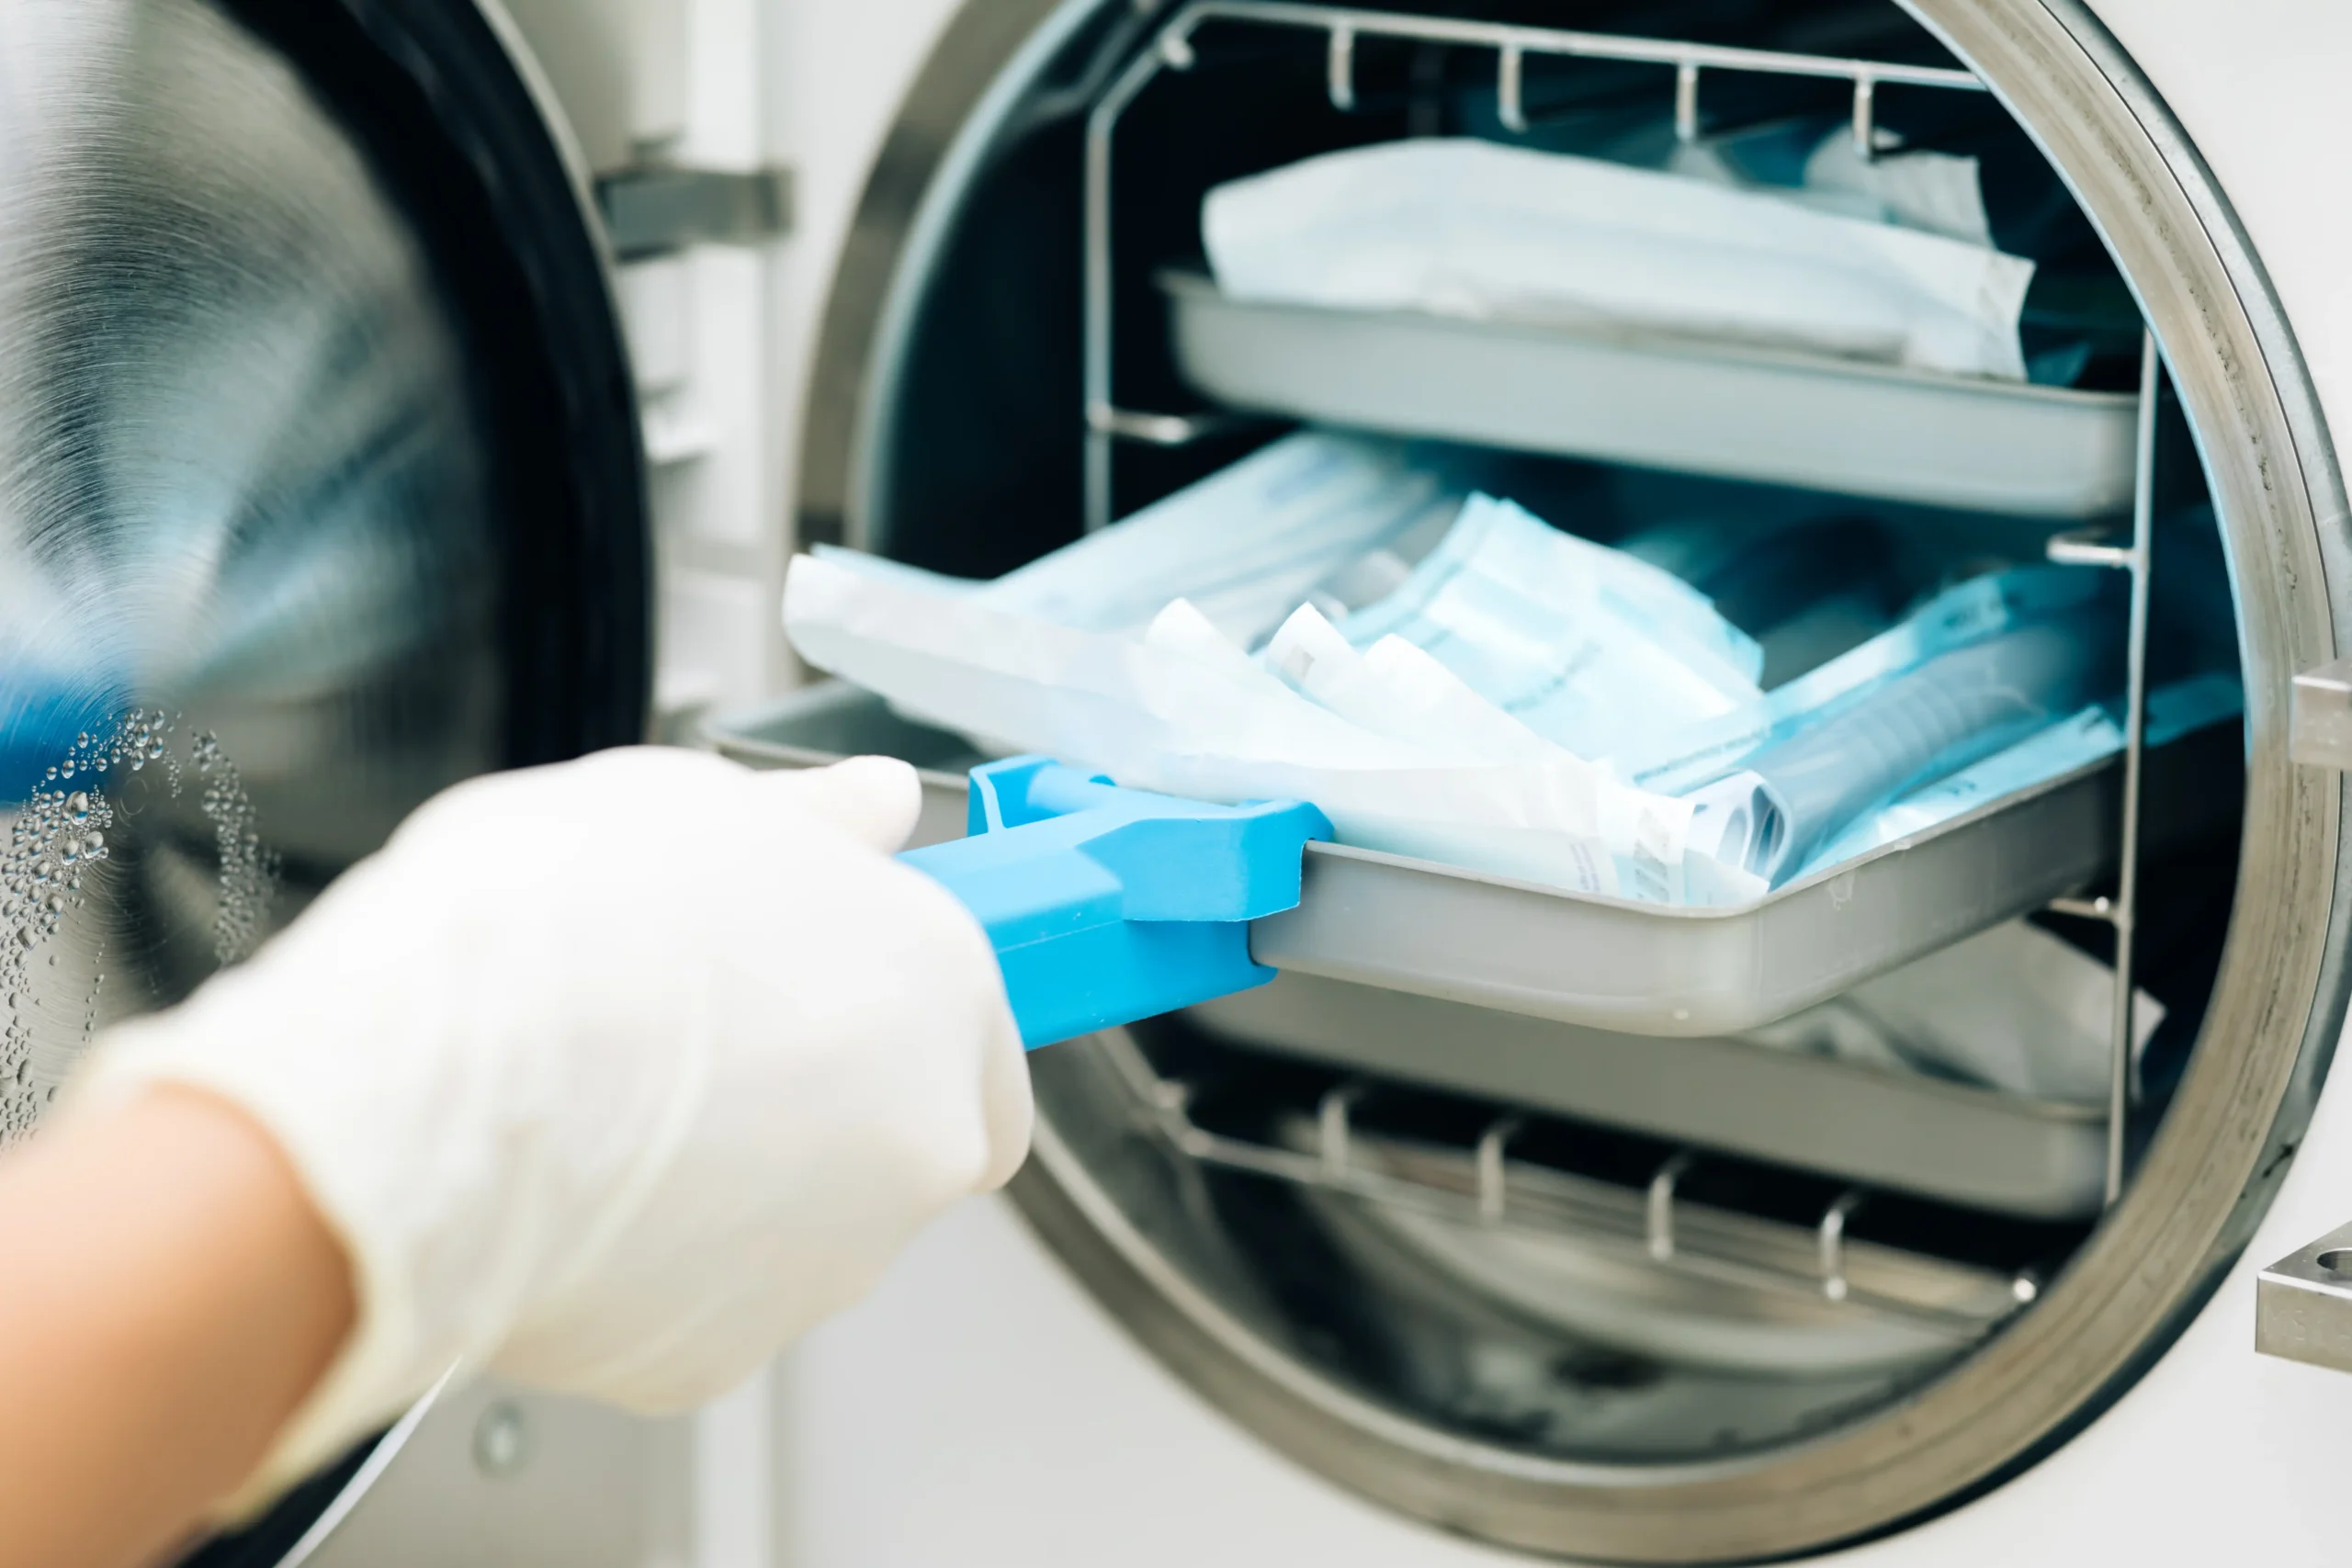 Why is compliance with IFU sterile processing essential in safeguarding patient health?